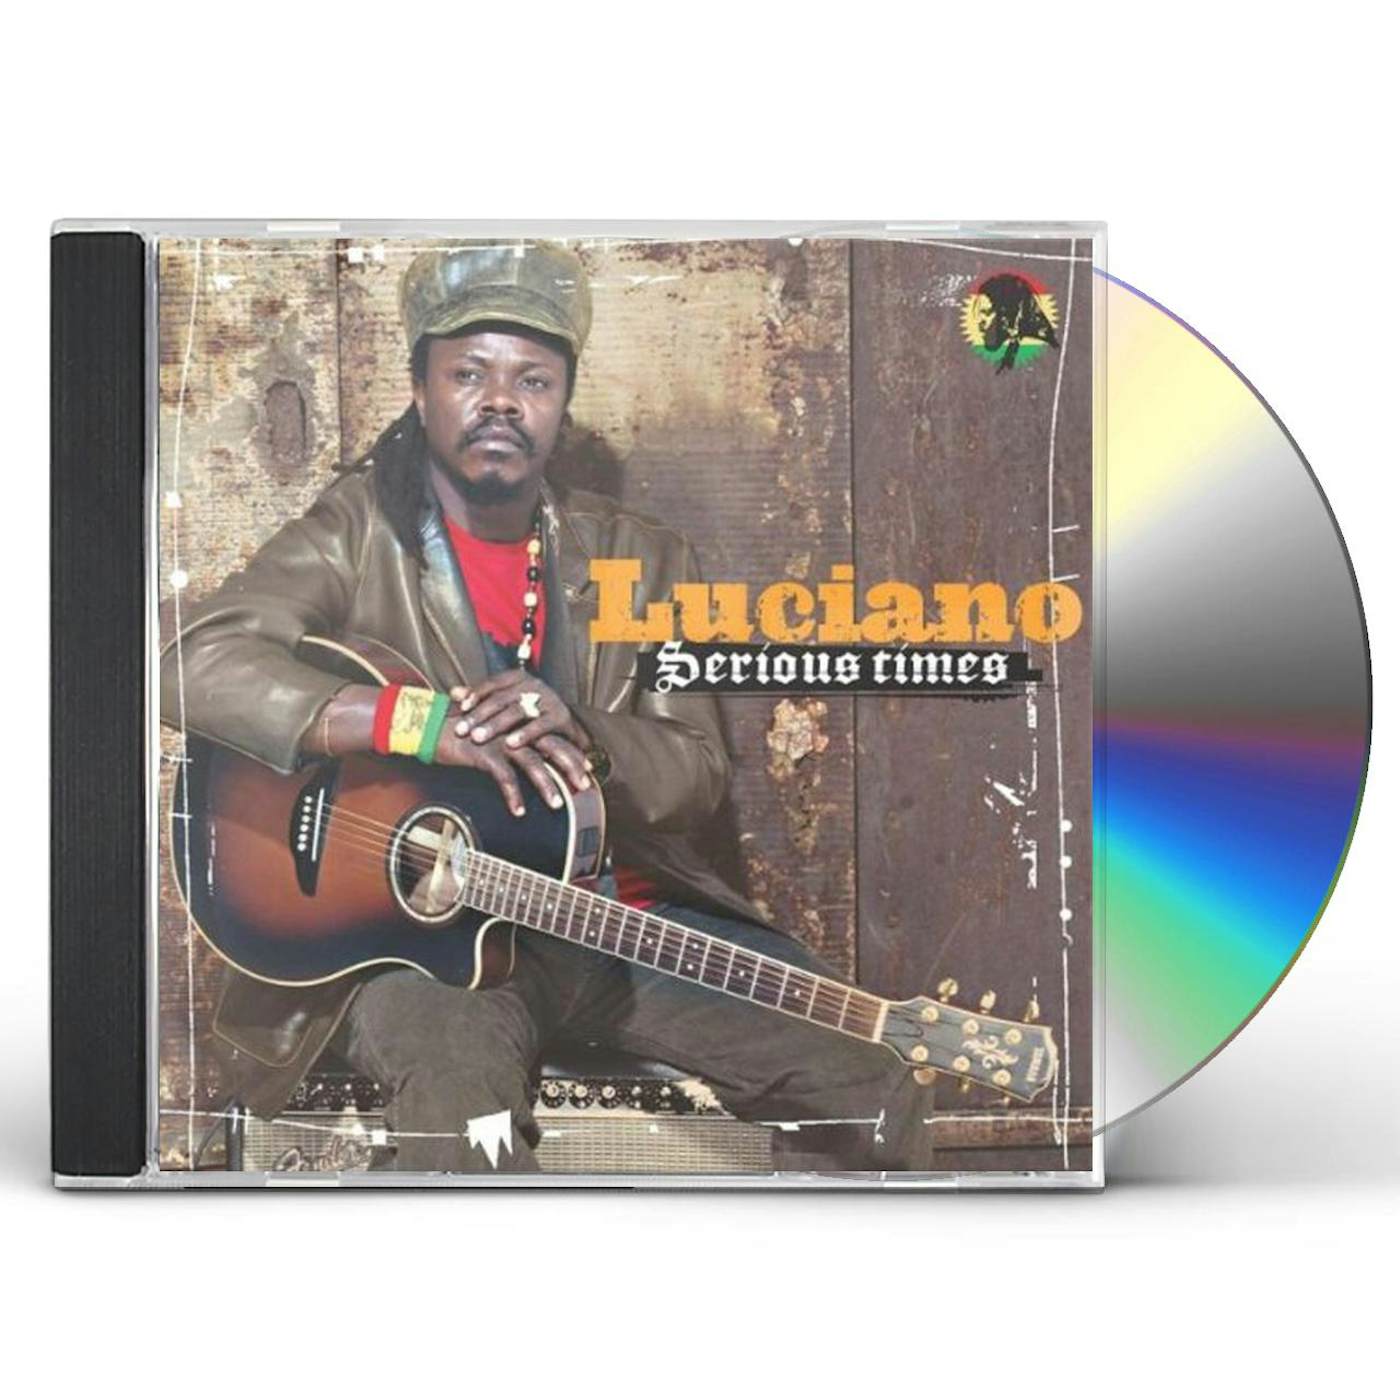 Luciano SERIOUS TIMES CD